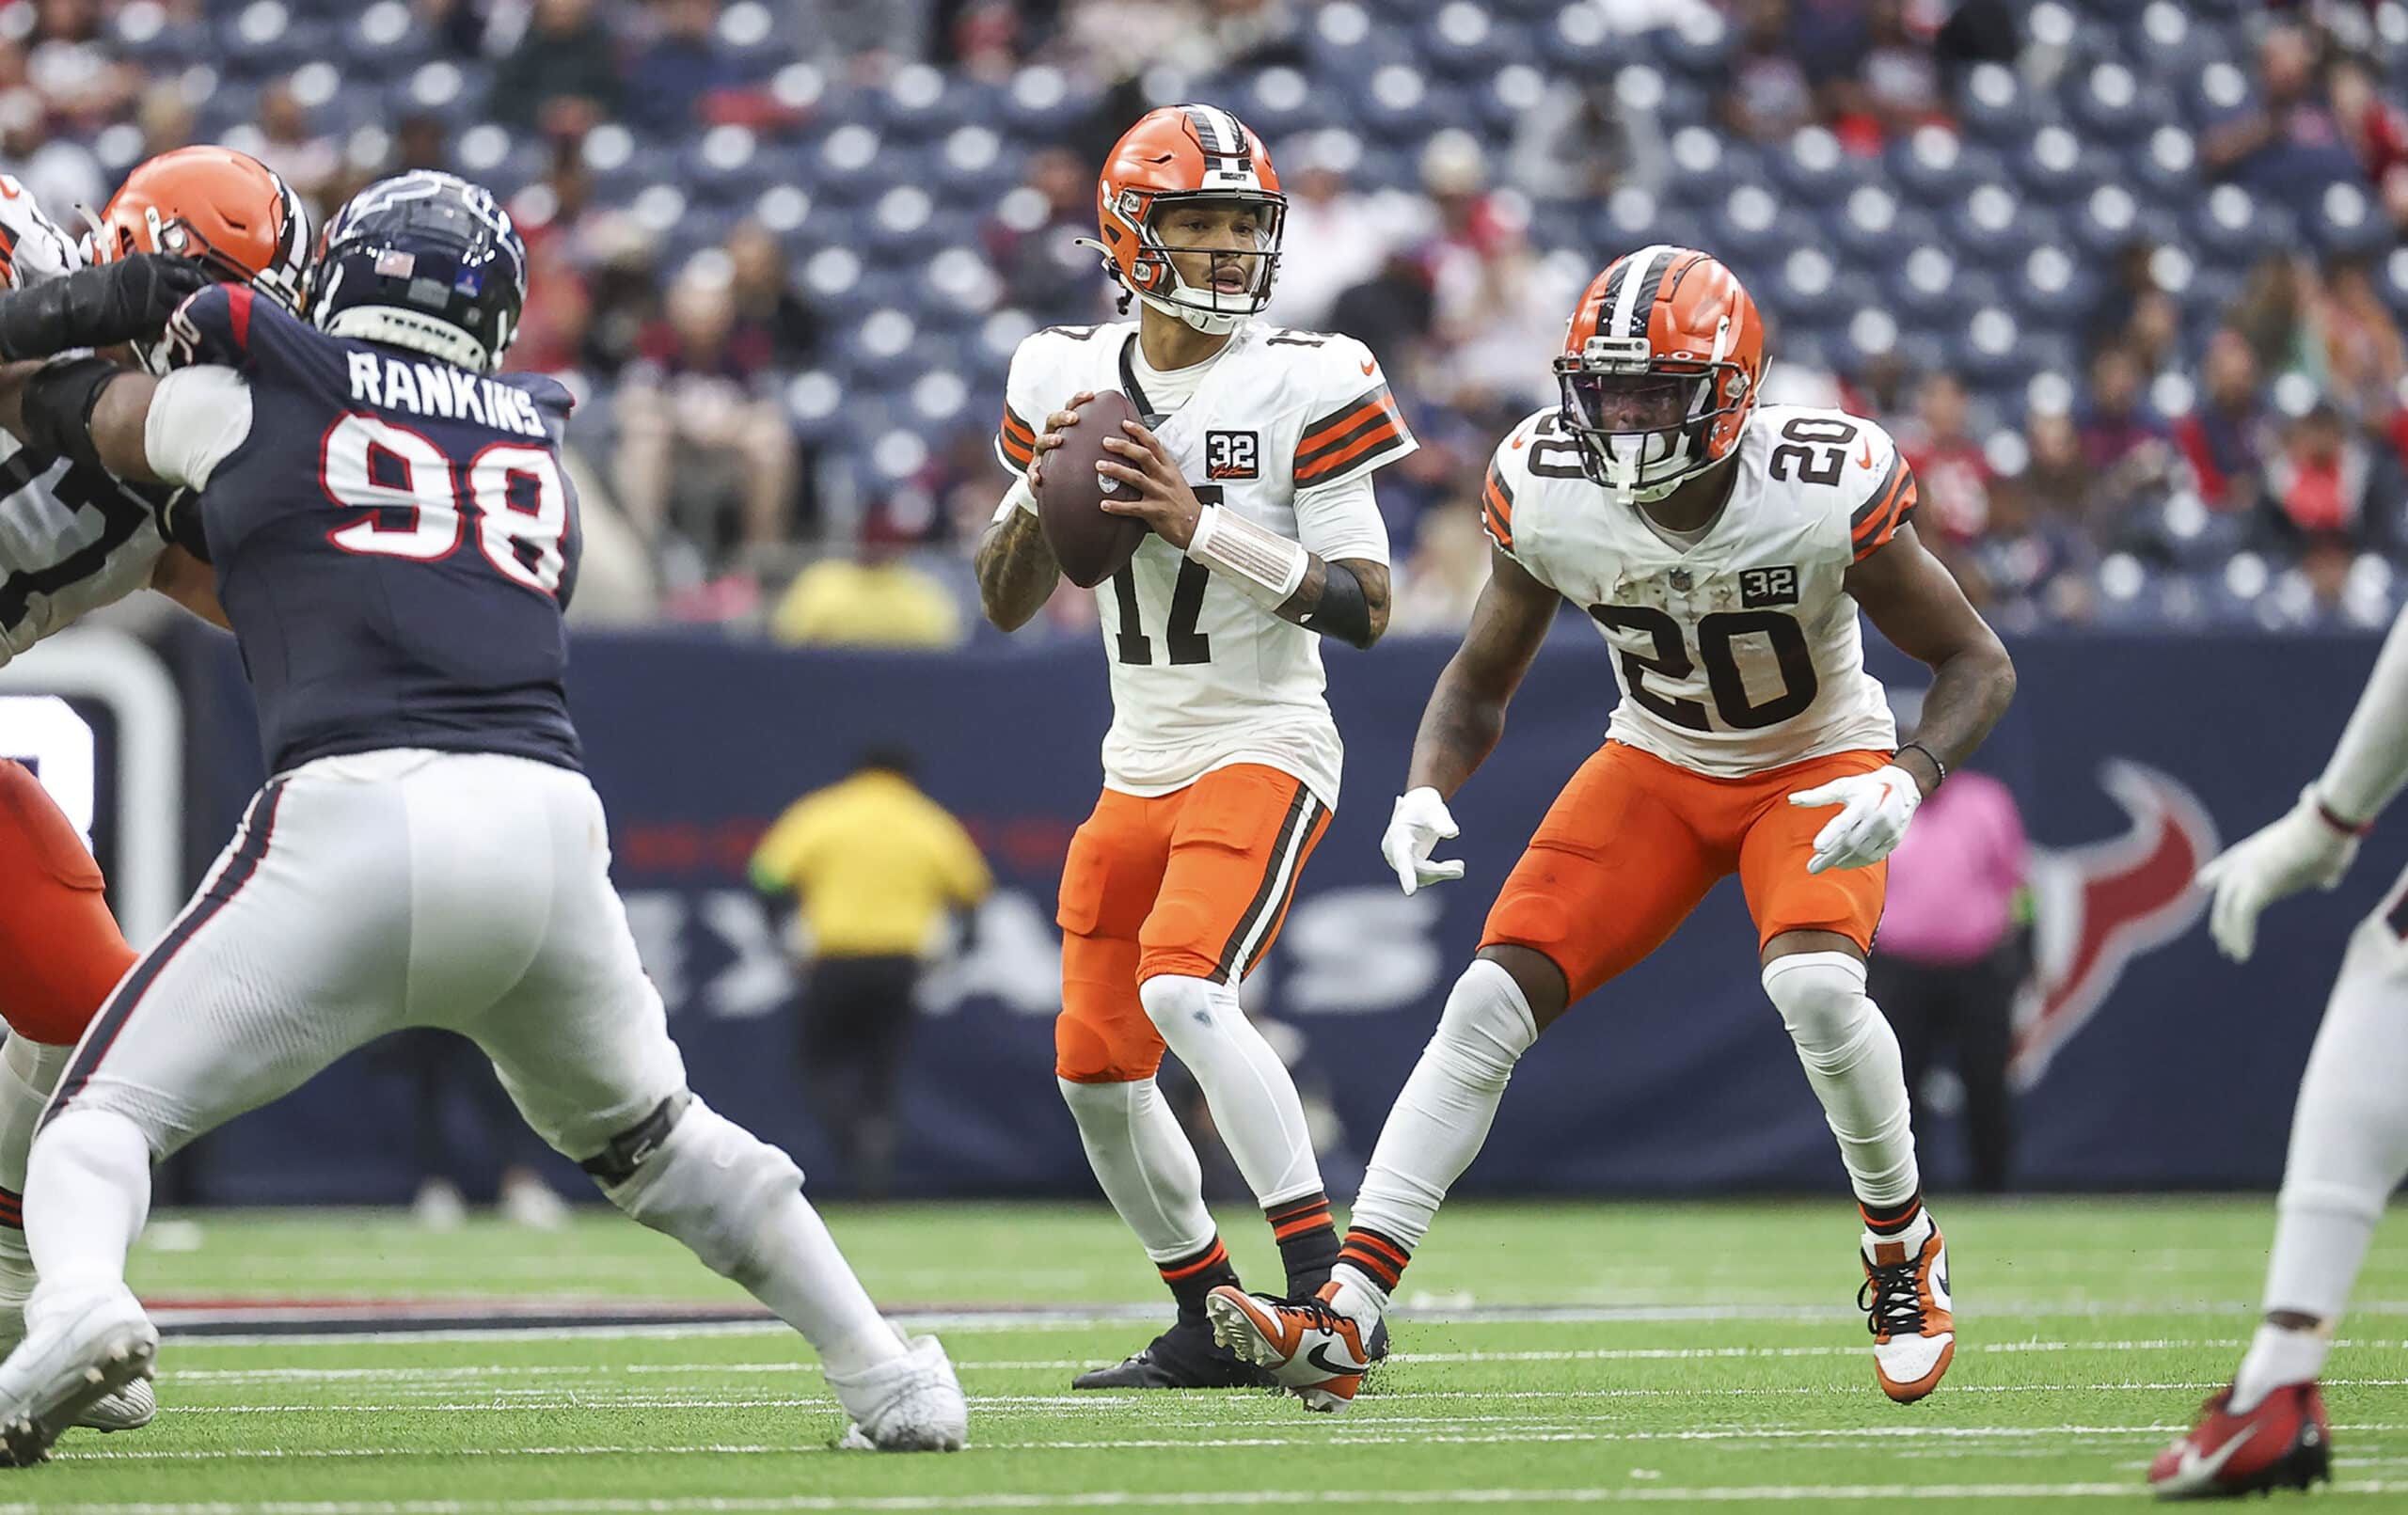 Cleveland Browns quarterback Dorian Thompson-Robinson (17) looks for an open receiver during the fourth quarter against the Houston Texans at NRG Stadium